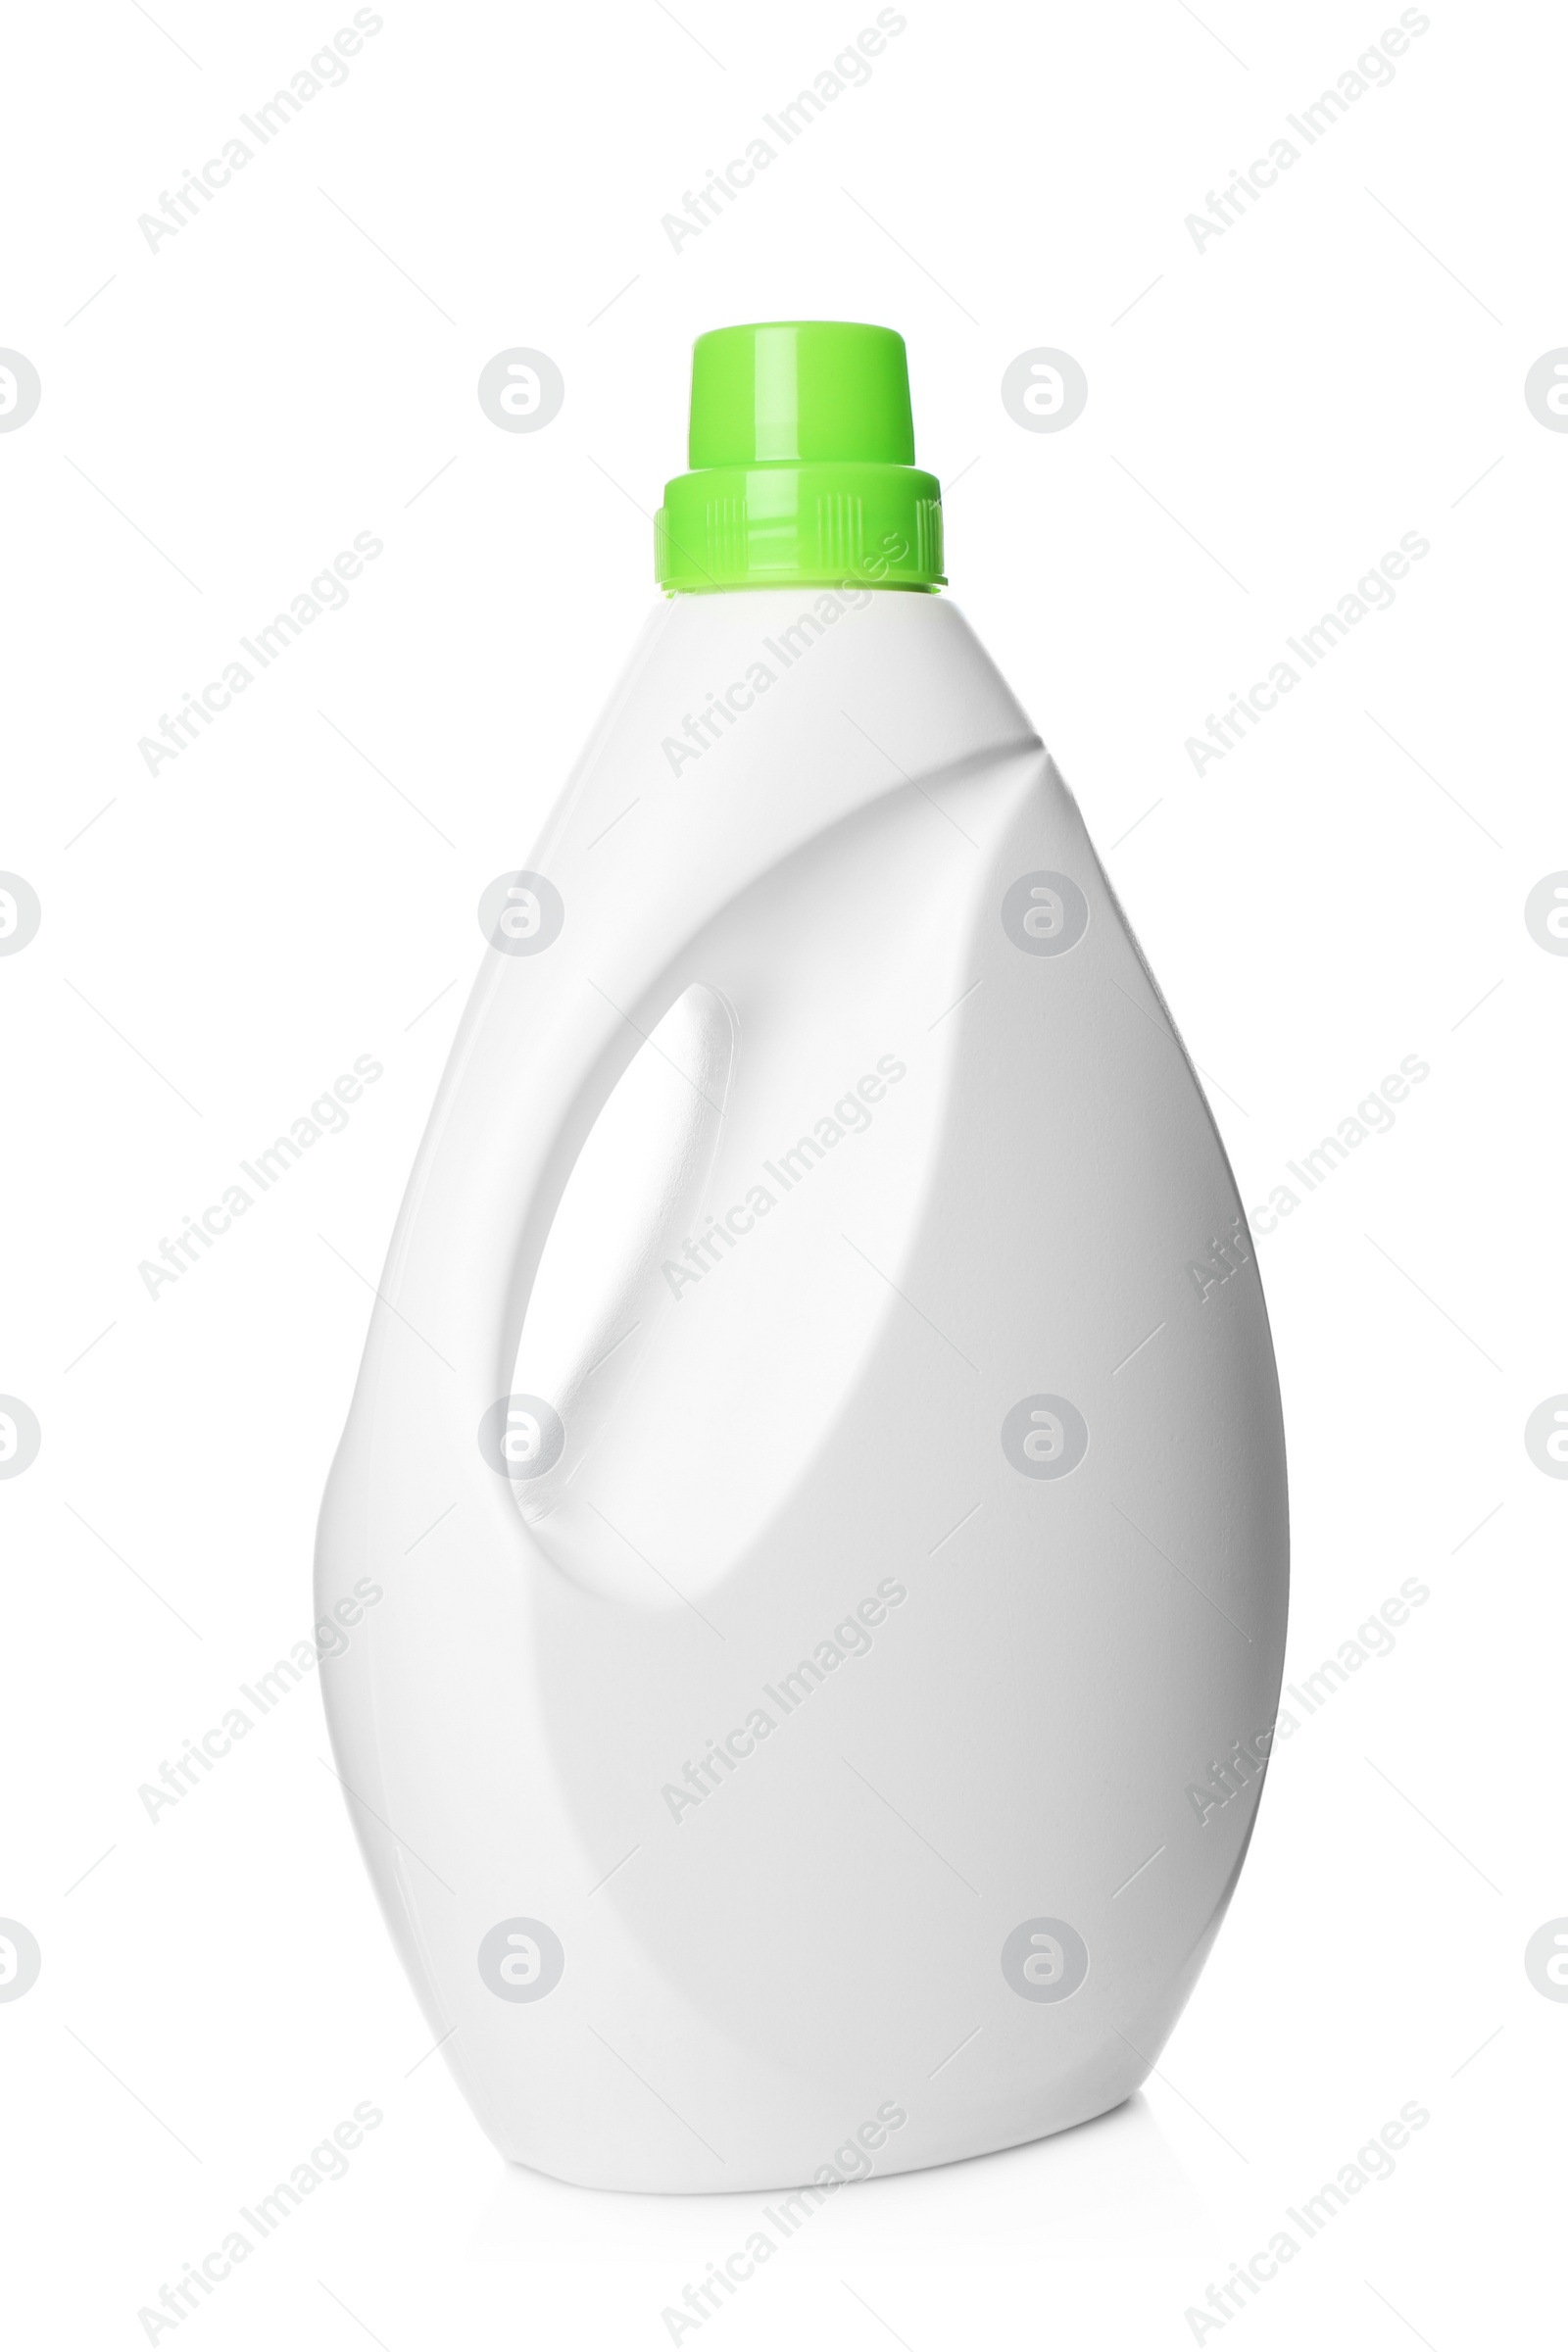 Photo of Bottle of cleaning product isolated on white